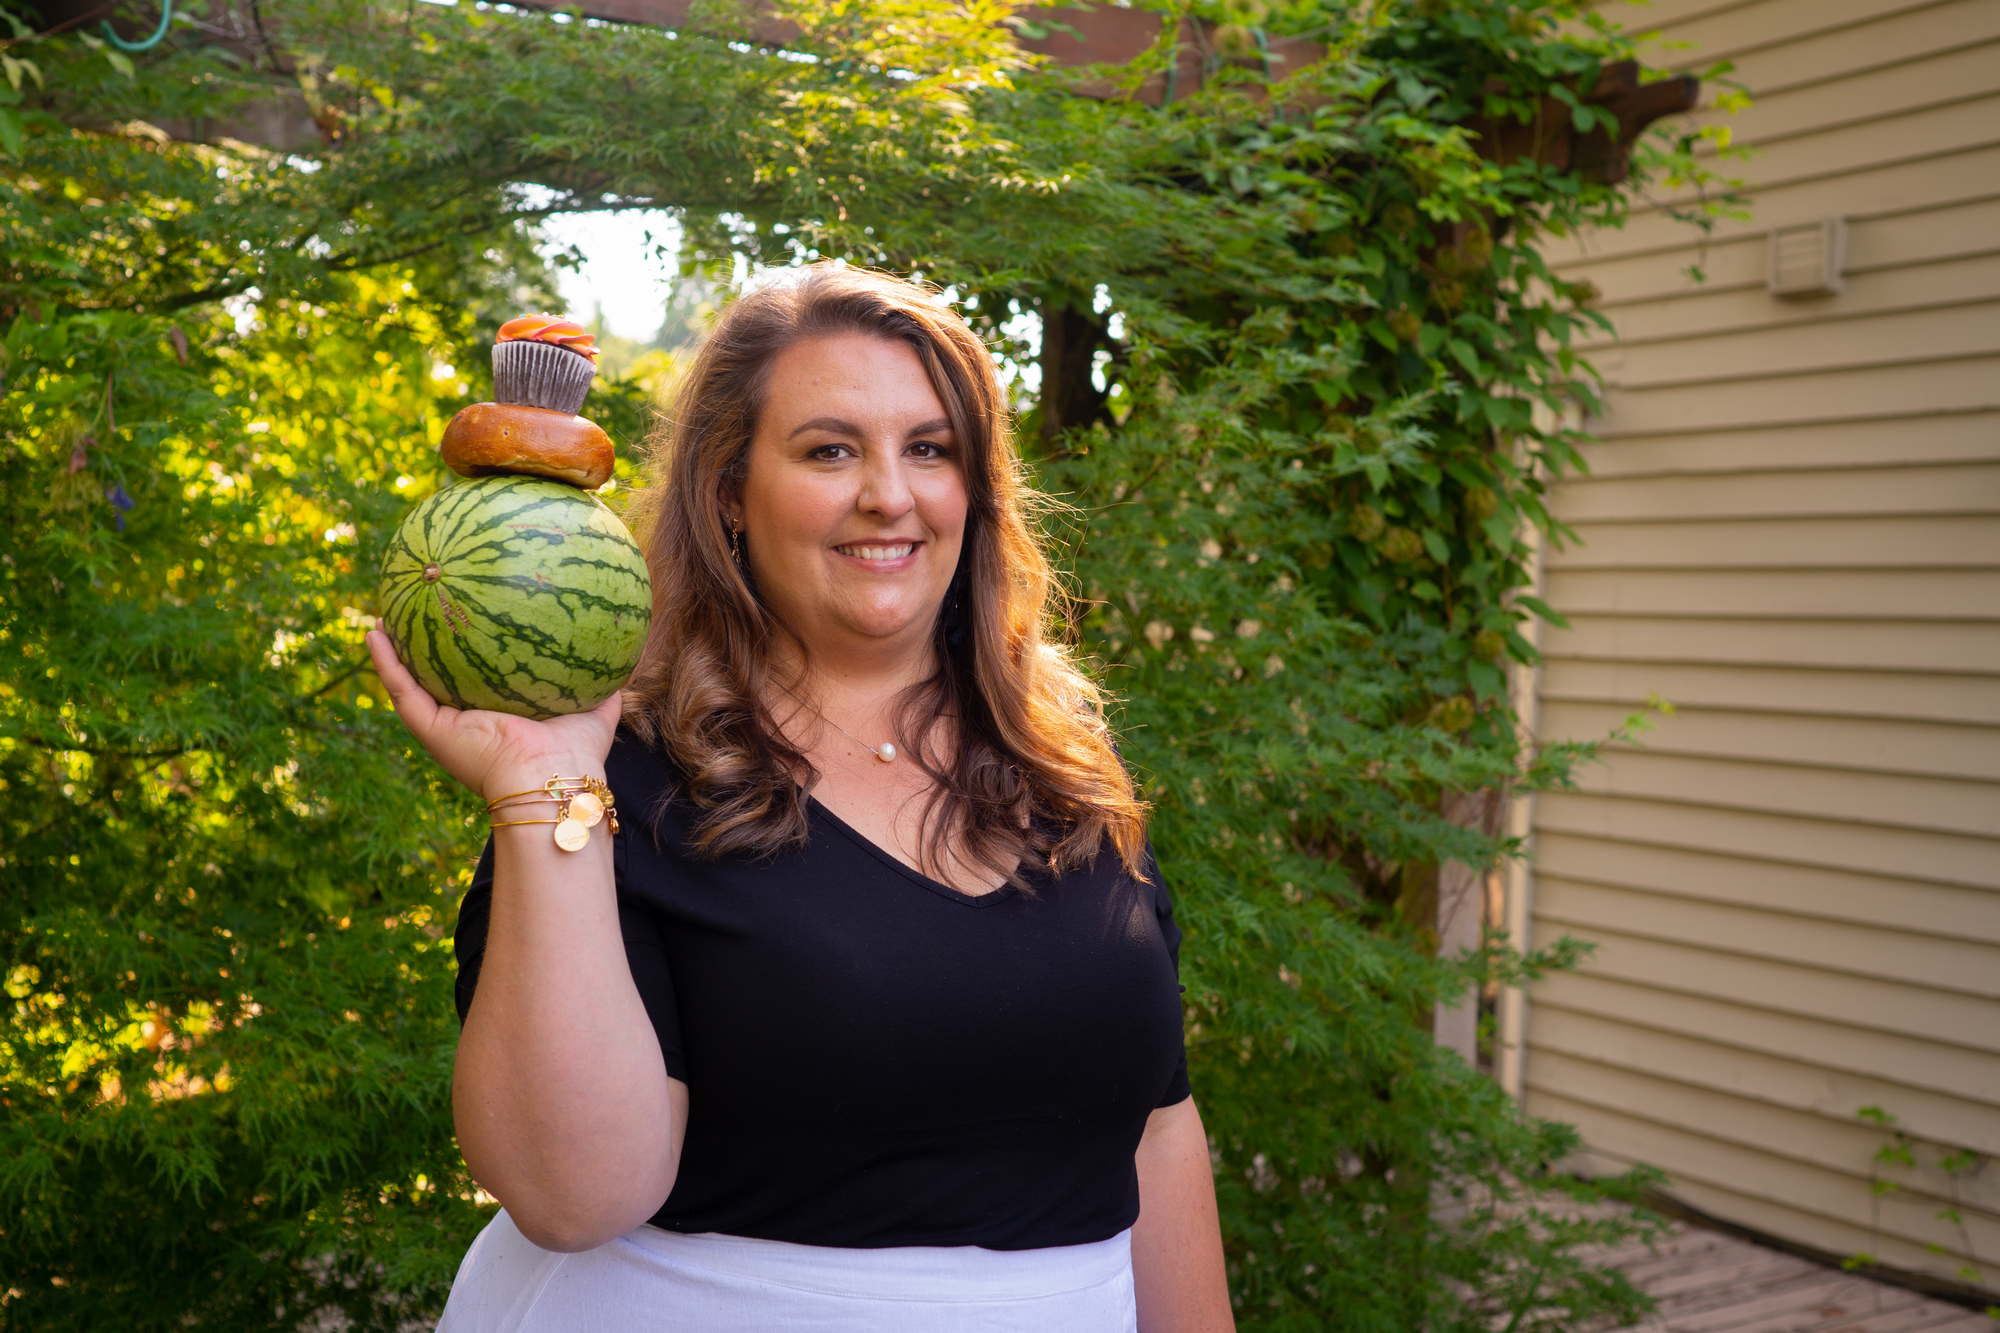 A fat woman poses confidently while holding a watermelon outdoors in the PNW